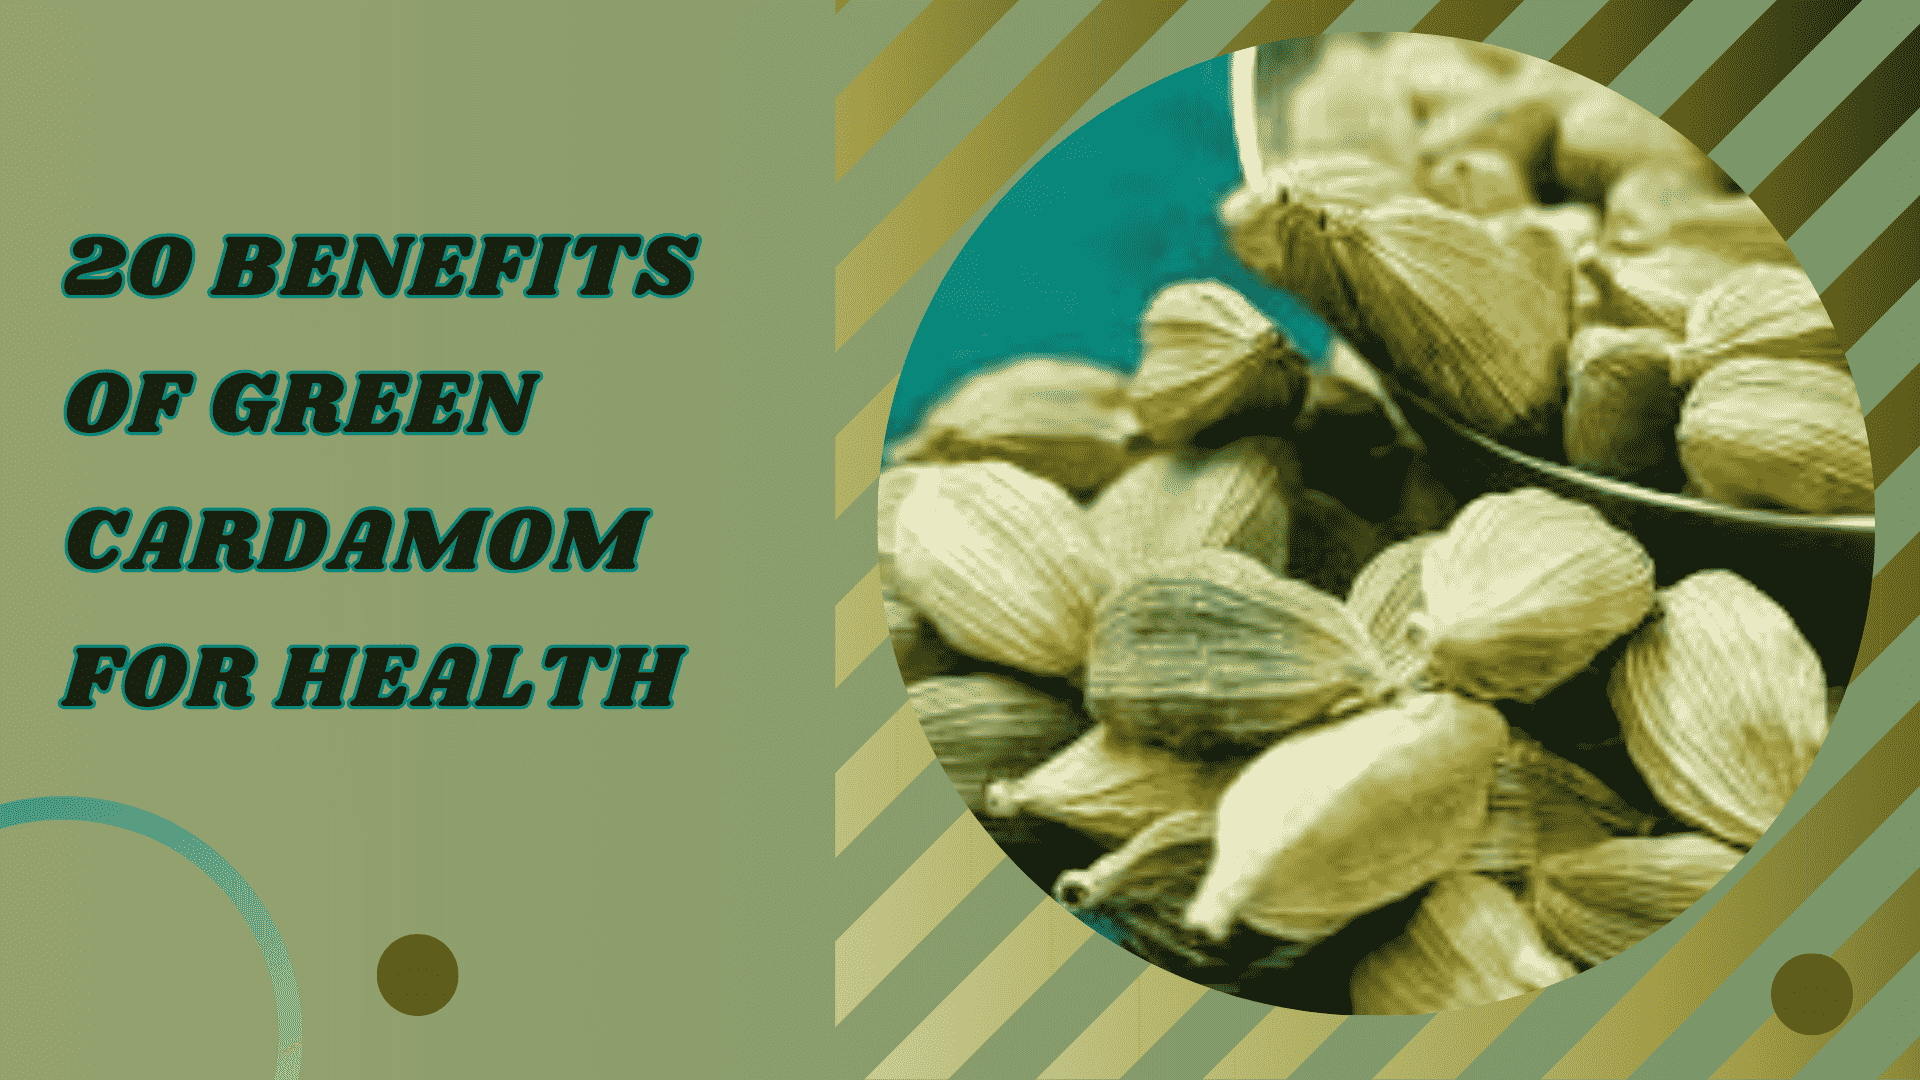 20 benefits of Green Cardamom for Health